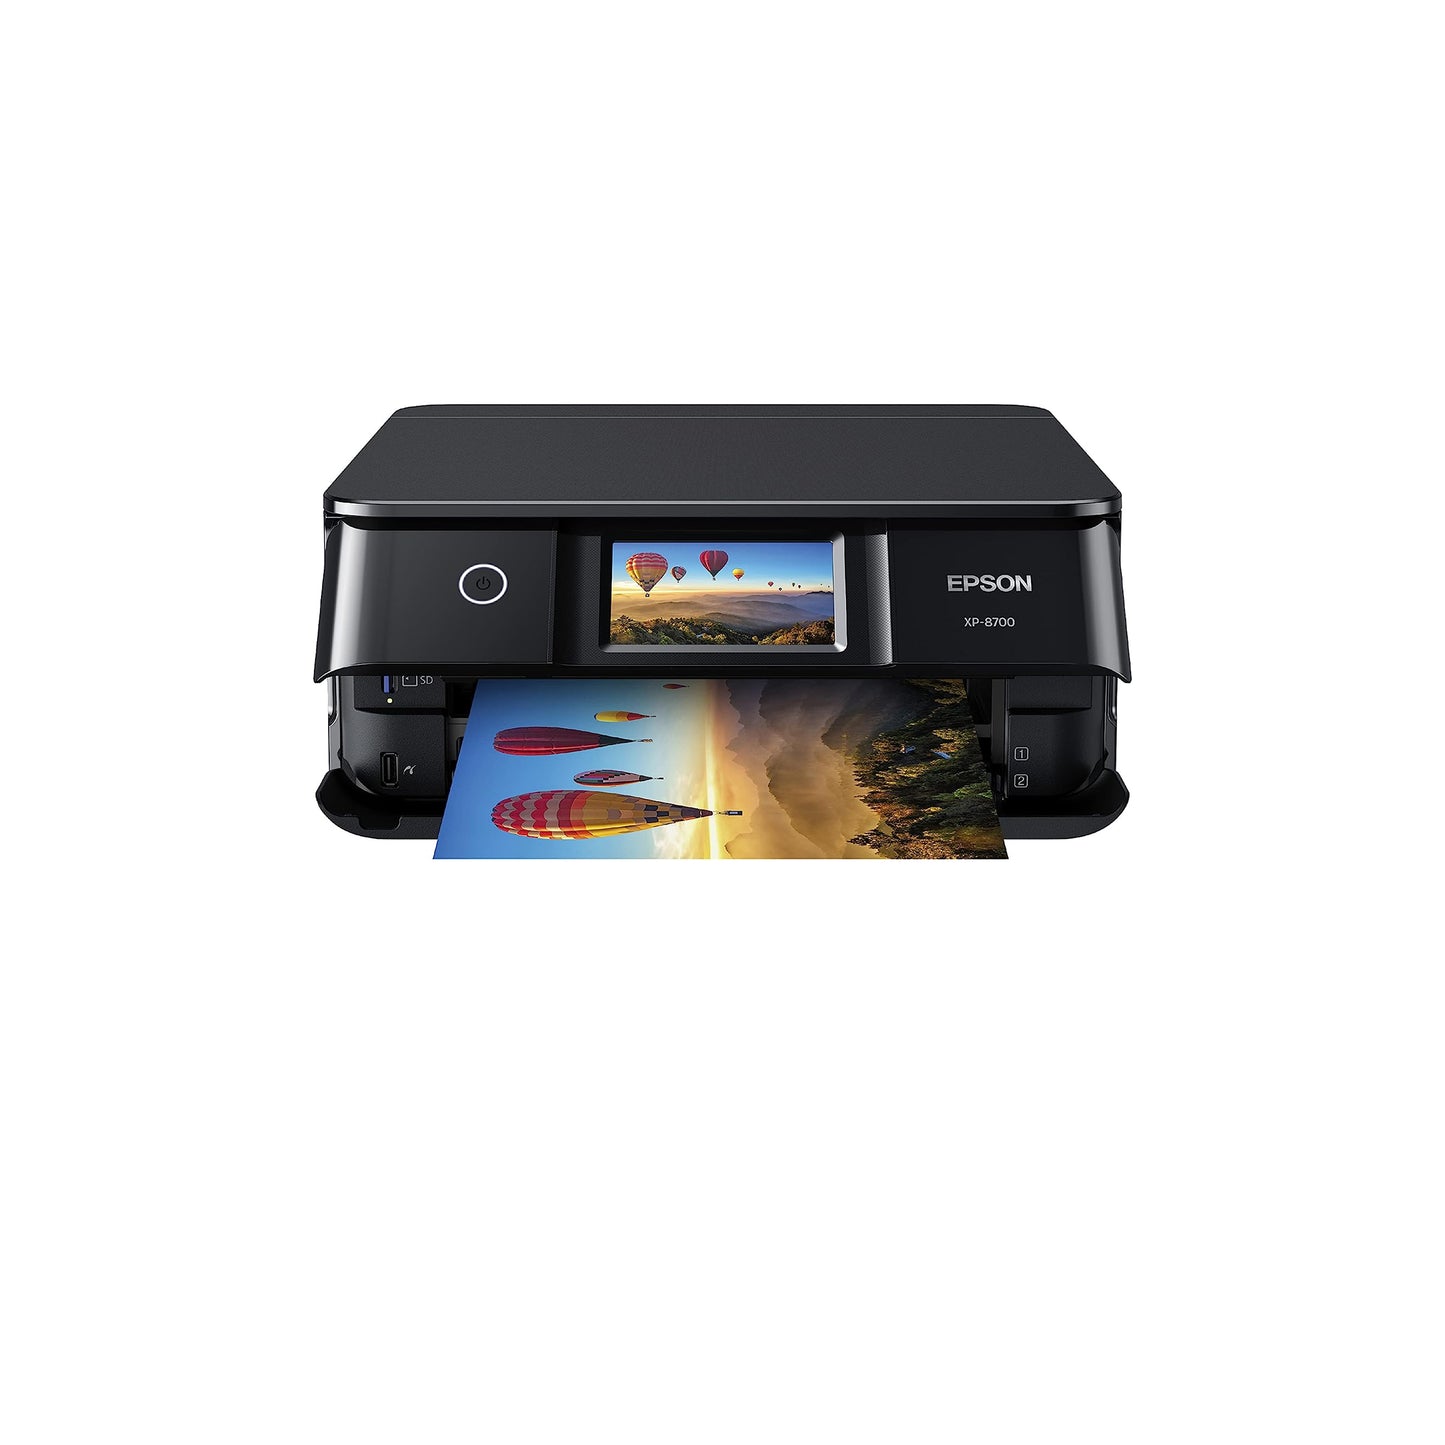 Epson Expression Photo XP-8700 Wireless All-in-One Printer with Built-in Scanner and Copier and 4.3" Color Touchscreen, Black